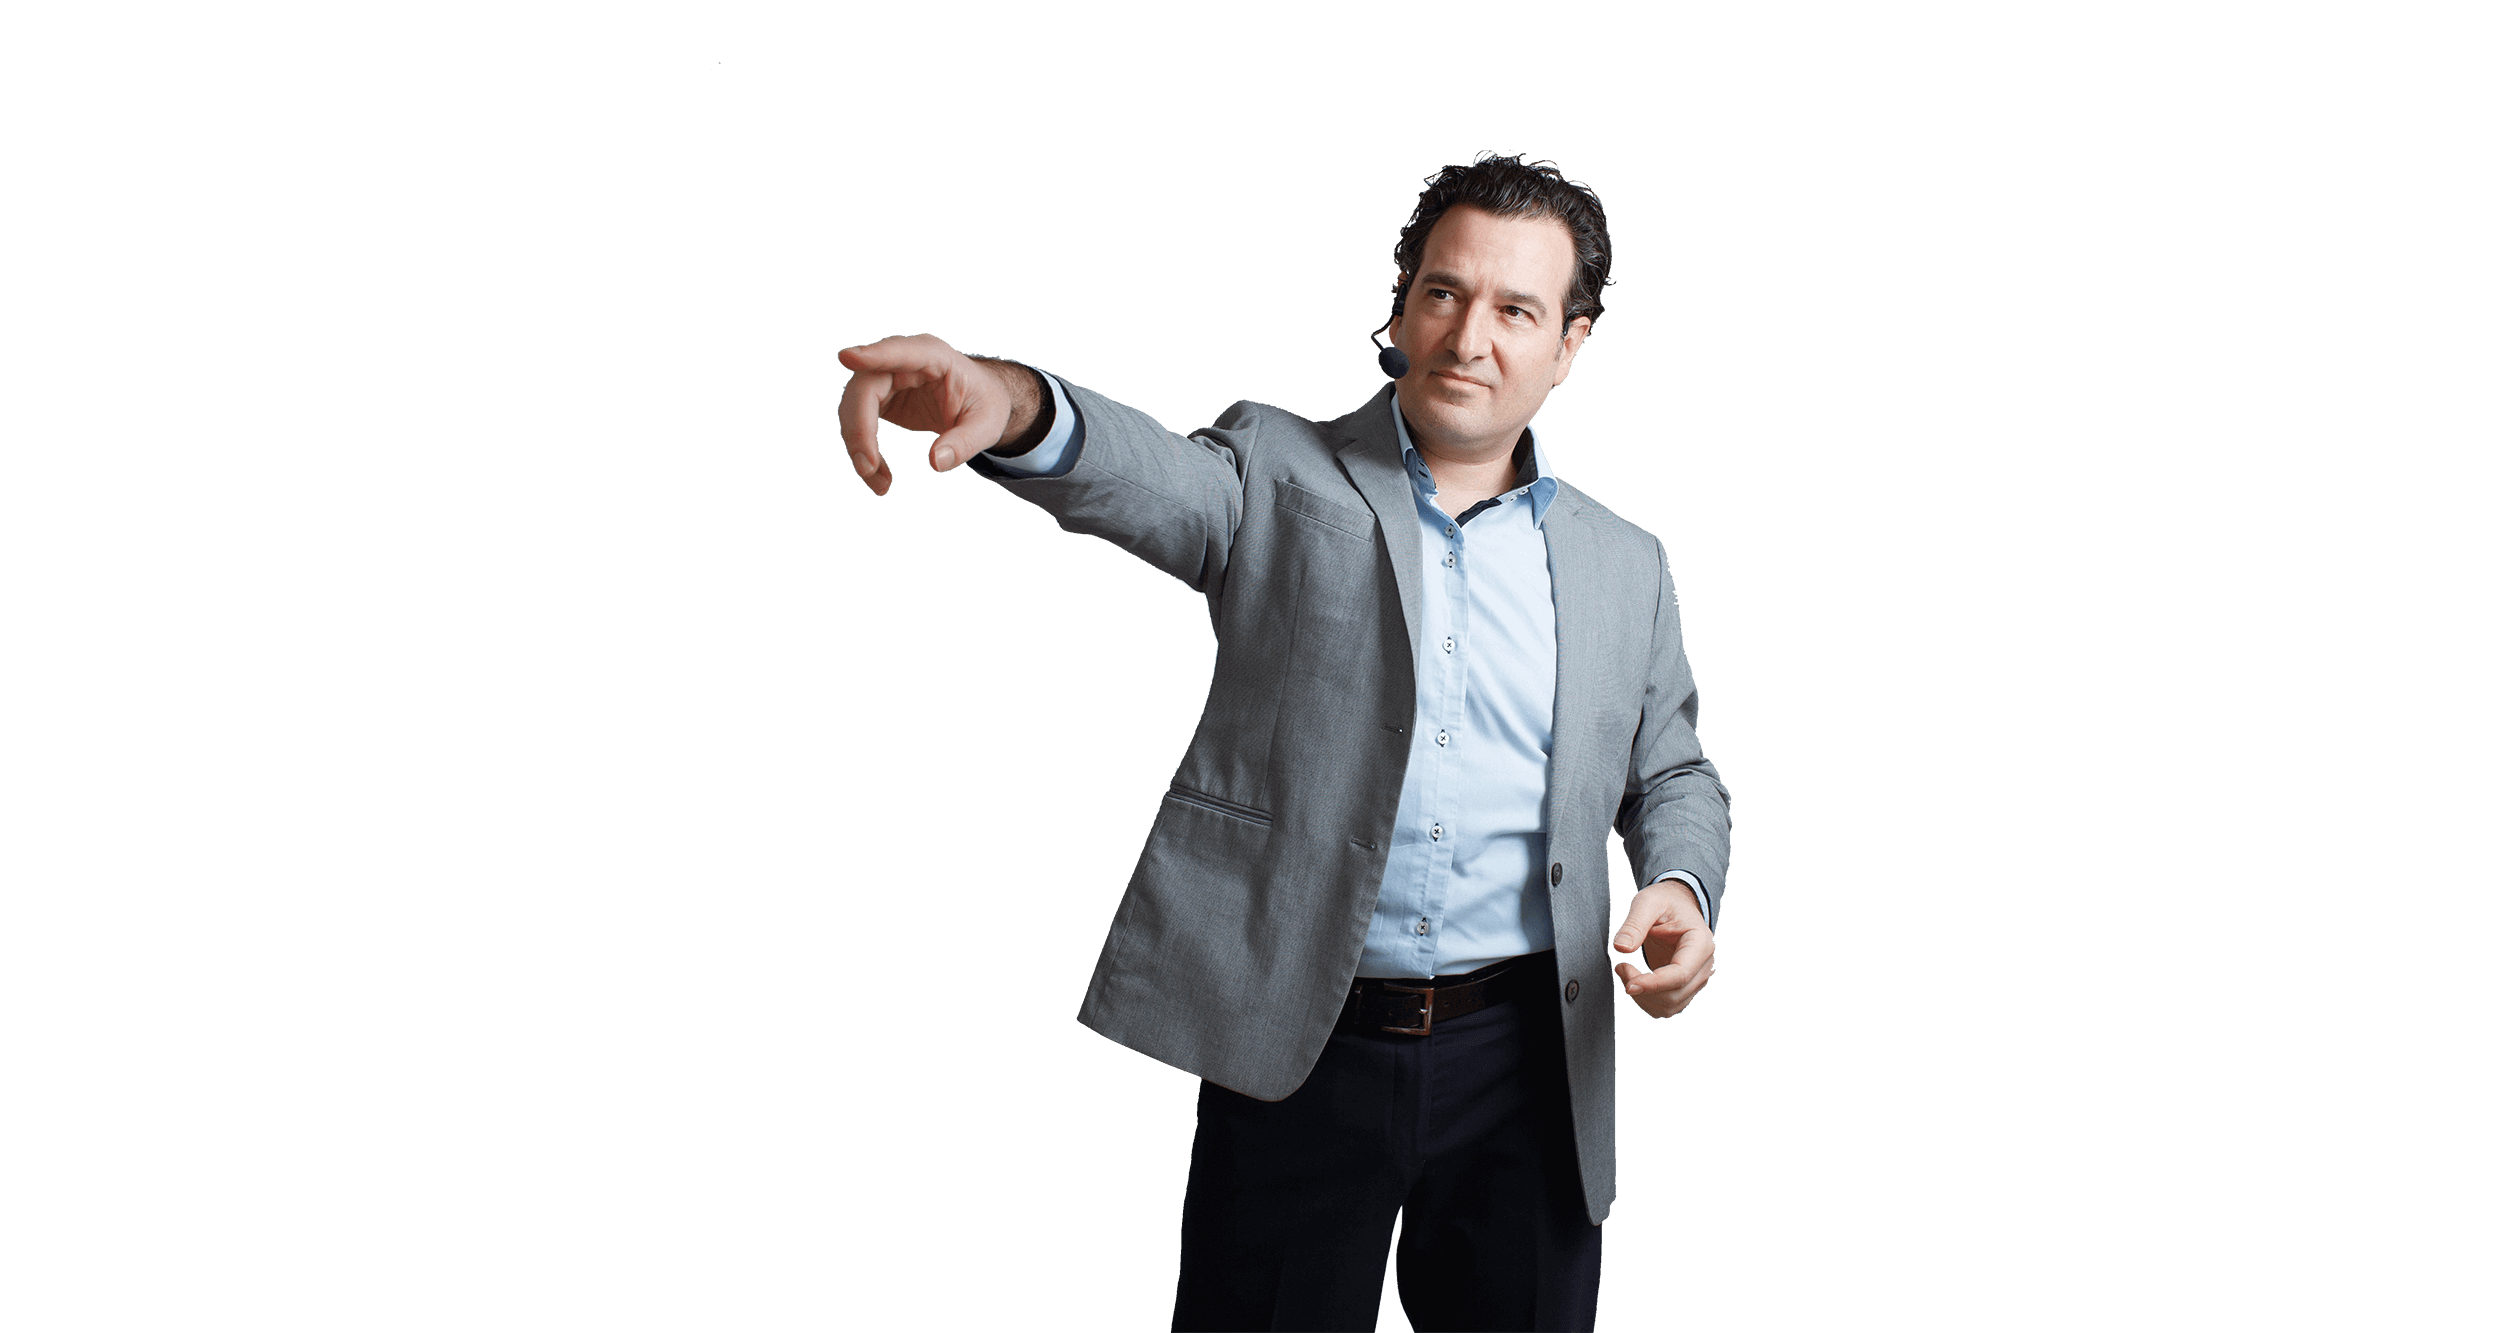 Daniel Levine, trends futurist, pointing at a business conference